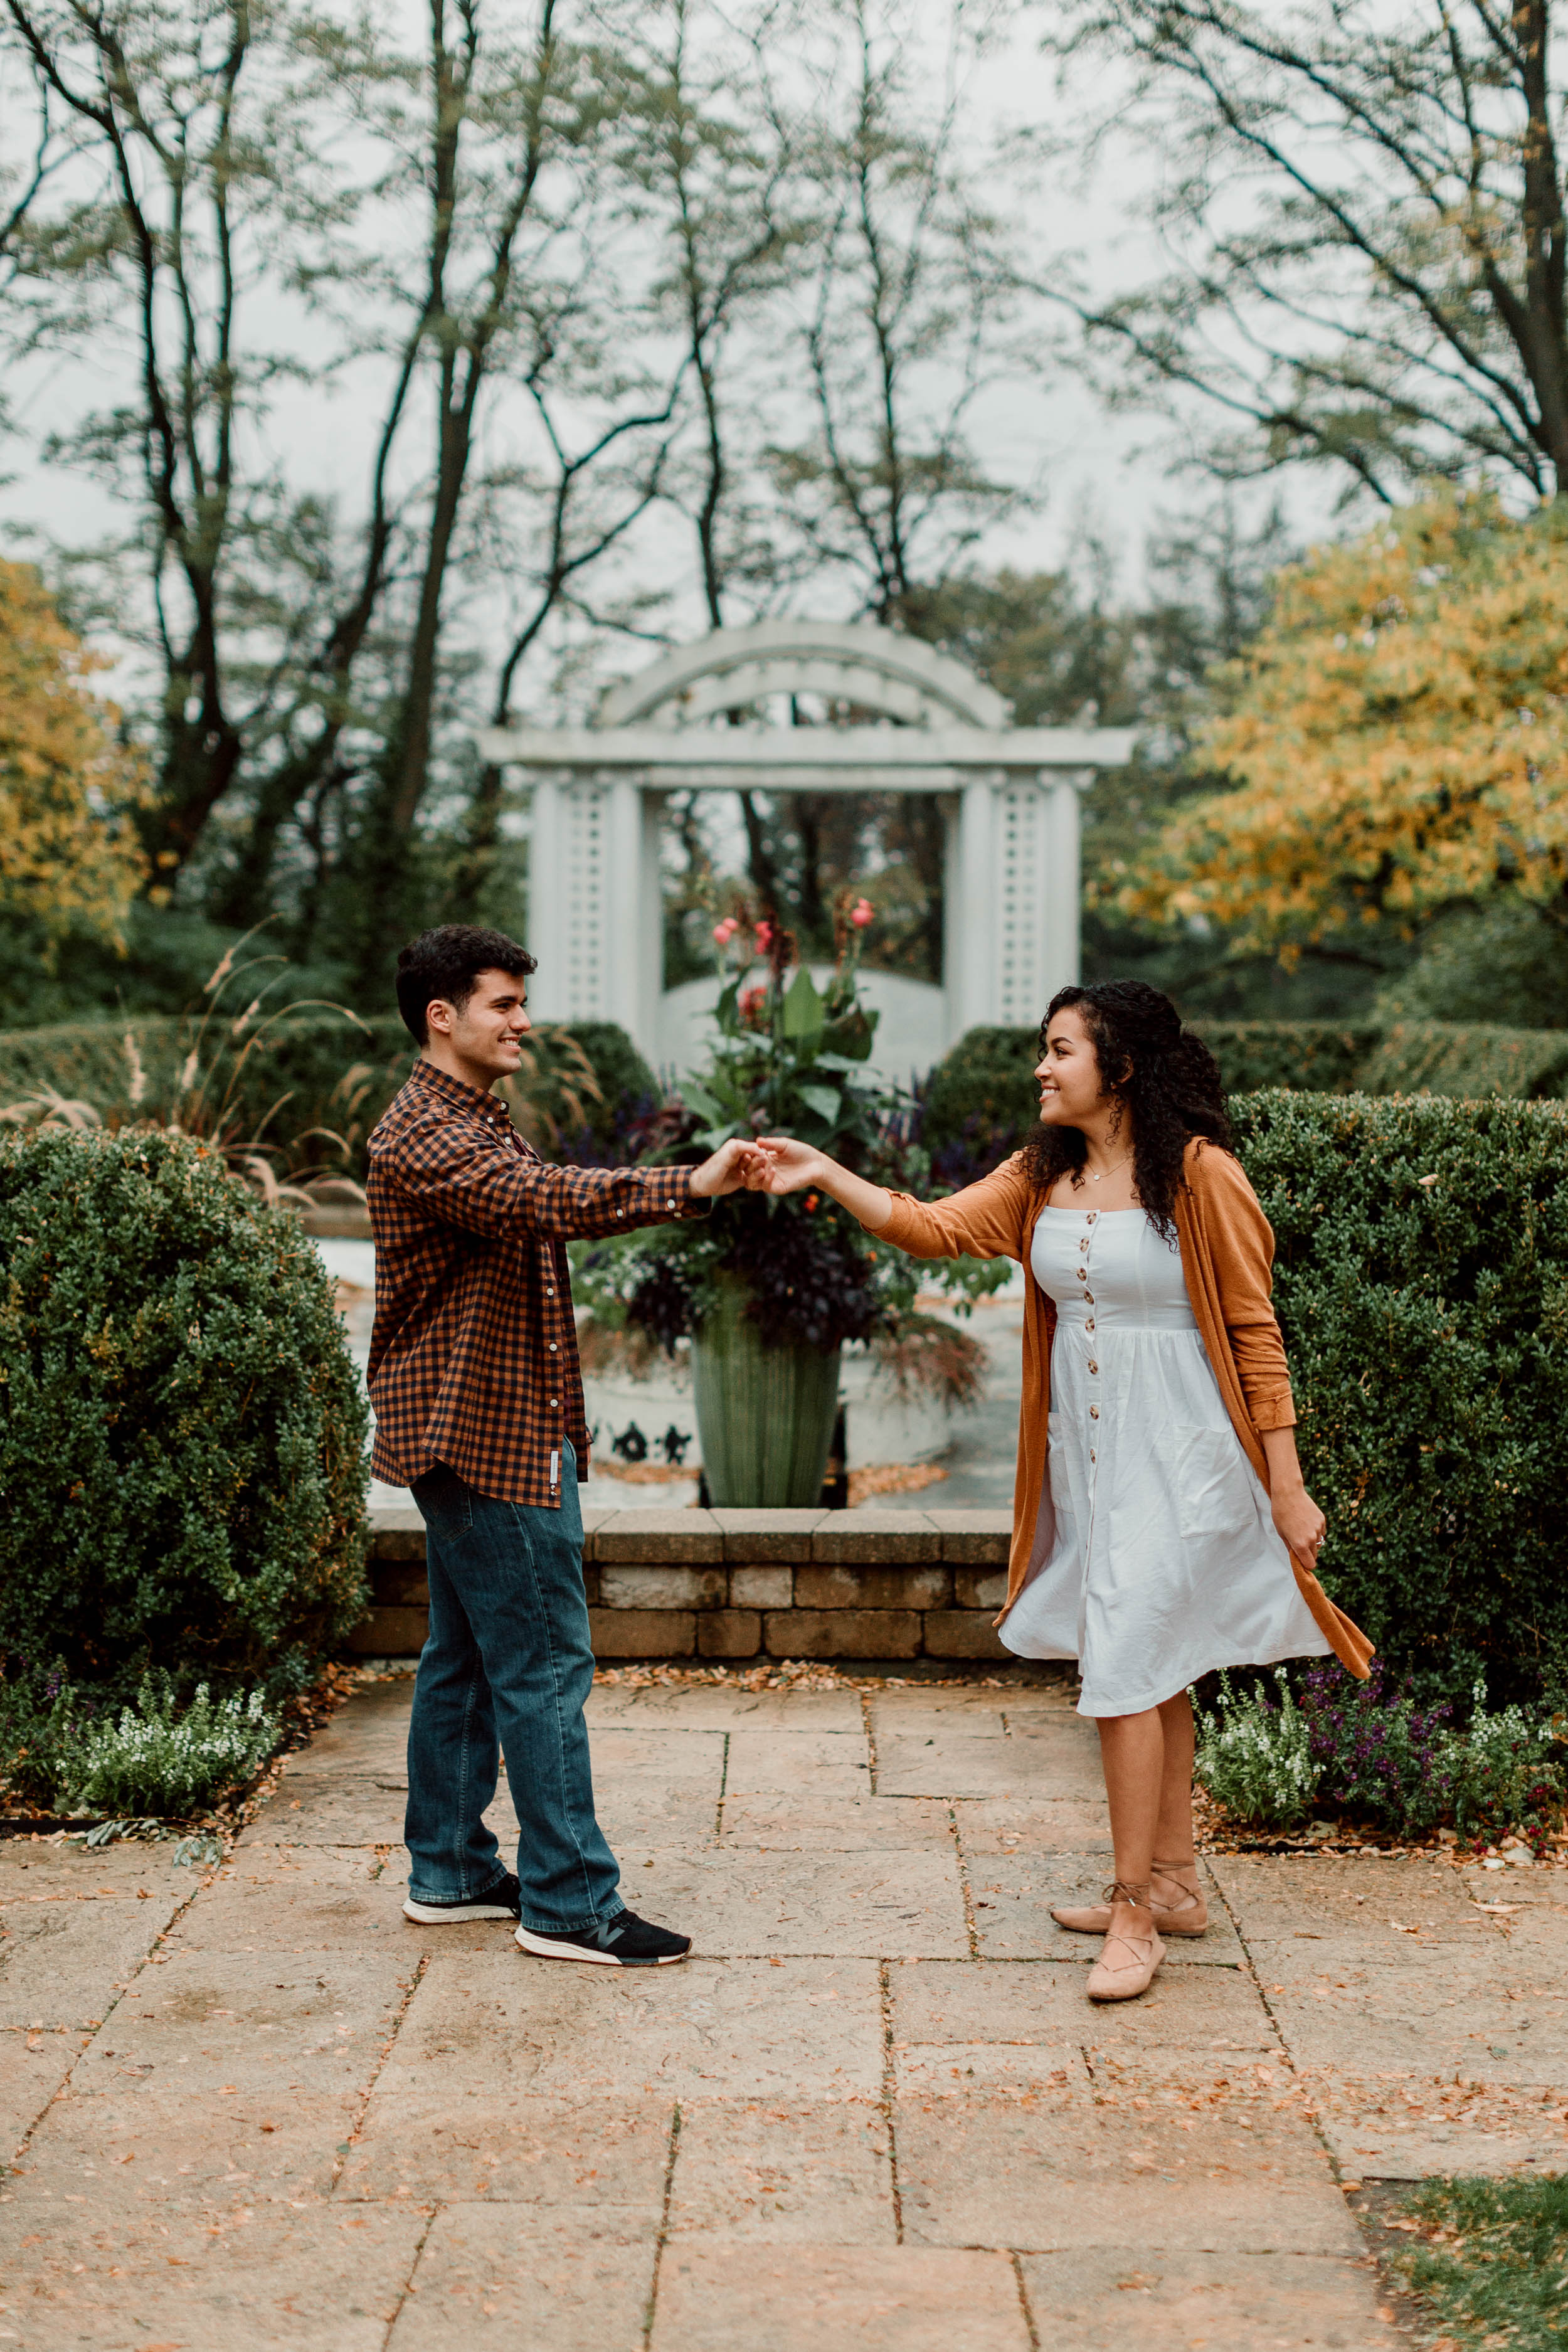 Romantic Engagement Photos in the Garden | Spring Engagement Session Outfits | Sweet Couple in Chicago | Hurley Gardens Engagement Session | Chicago Engagement Photographer | Outdoor Engagement Photo Locations in Chicago | Engagement Photo Locations Chicago | Where to take Engagement Photos in Chicago
